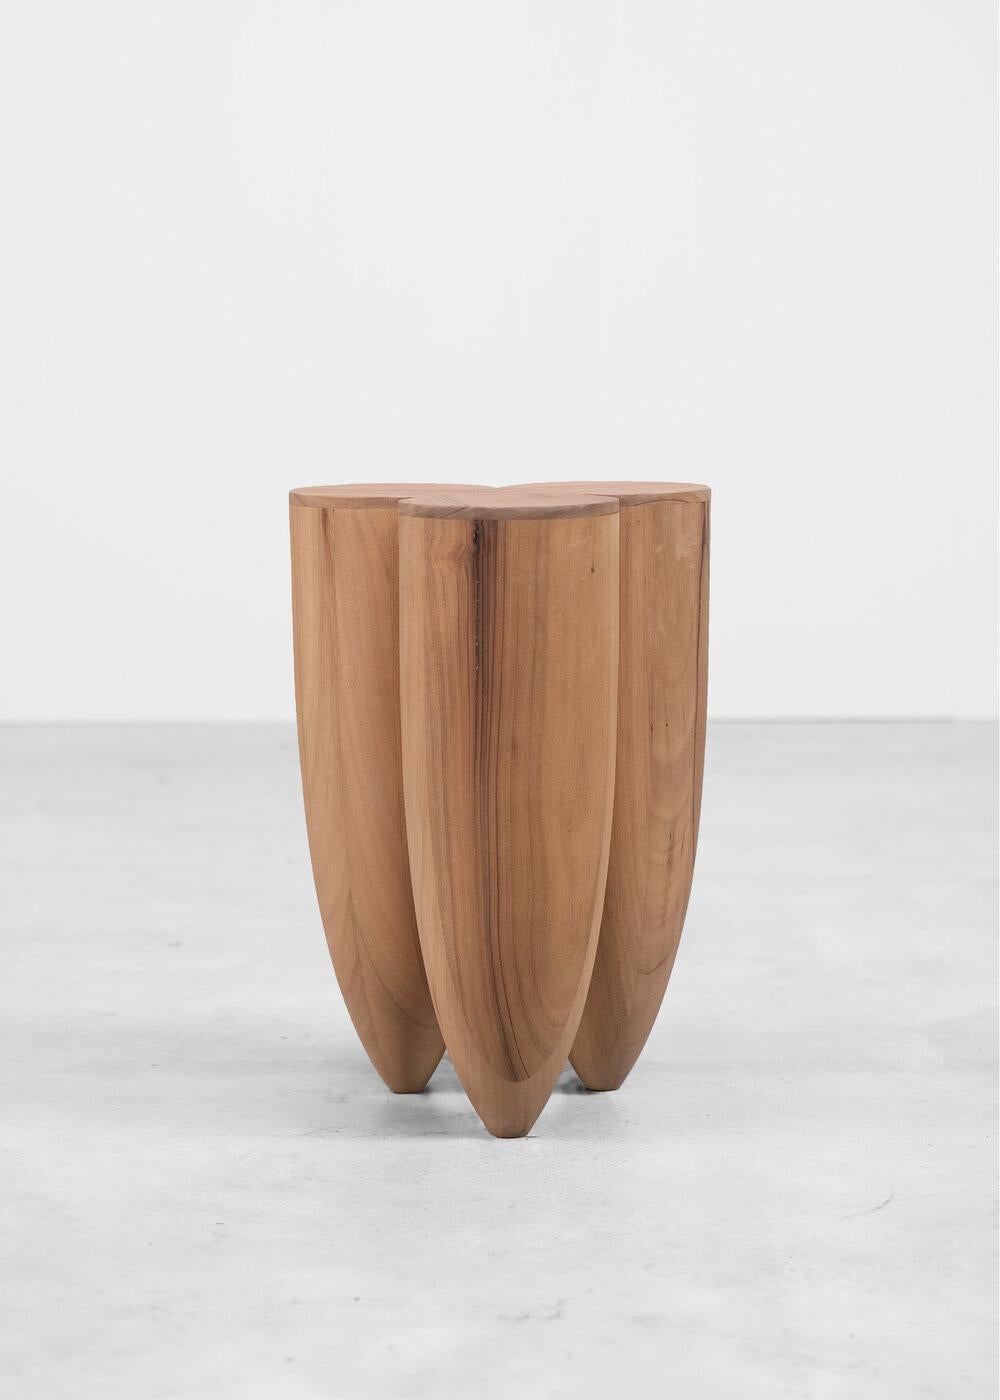 Contemporary Black Stool in Iroko Wood, Senufo by Arno Declercq

Material: Iroko Wood and Burned Steel
Dimensions: Dimensions: 50 cm H x 30 cm W

Made by hand, in Belgium.

Arno Declercq
Belgian designer and art dealer who makes bespoke